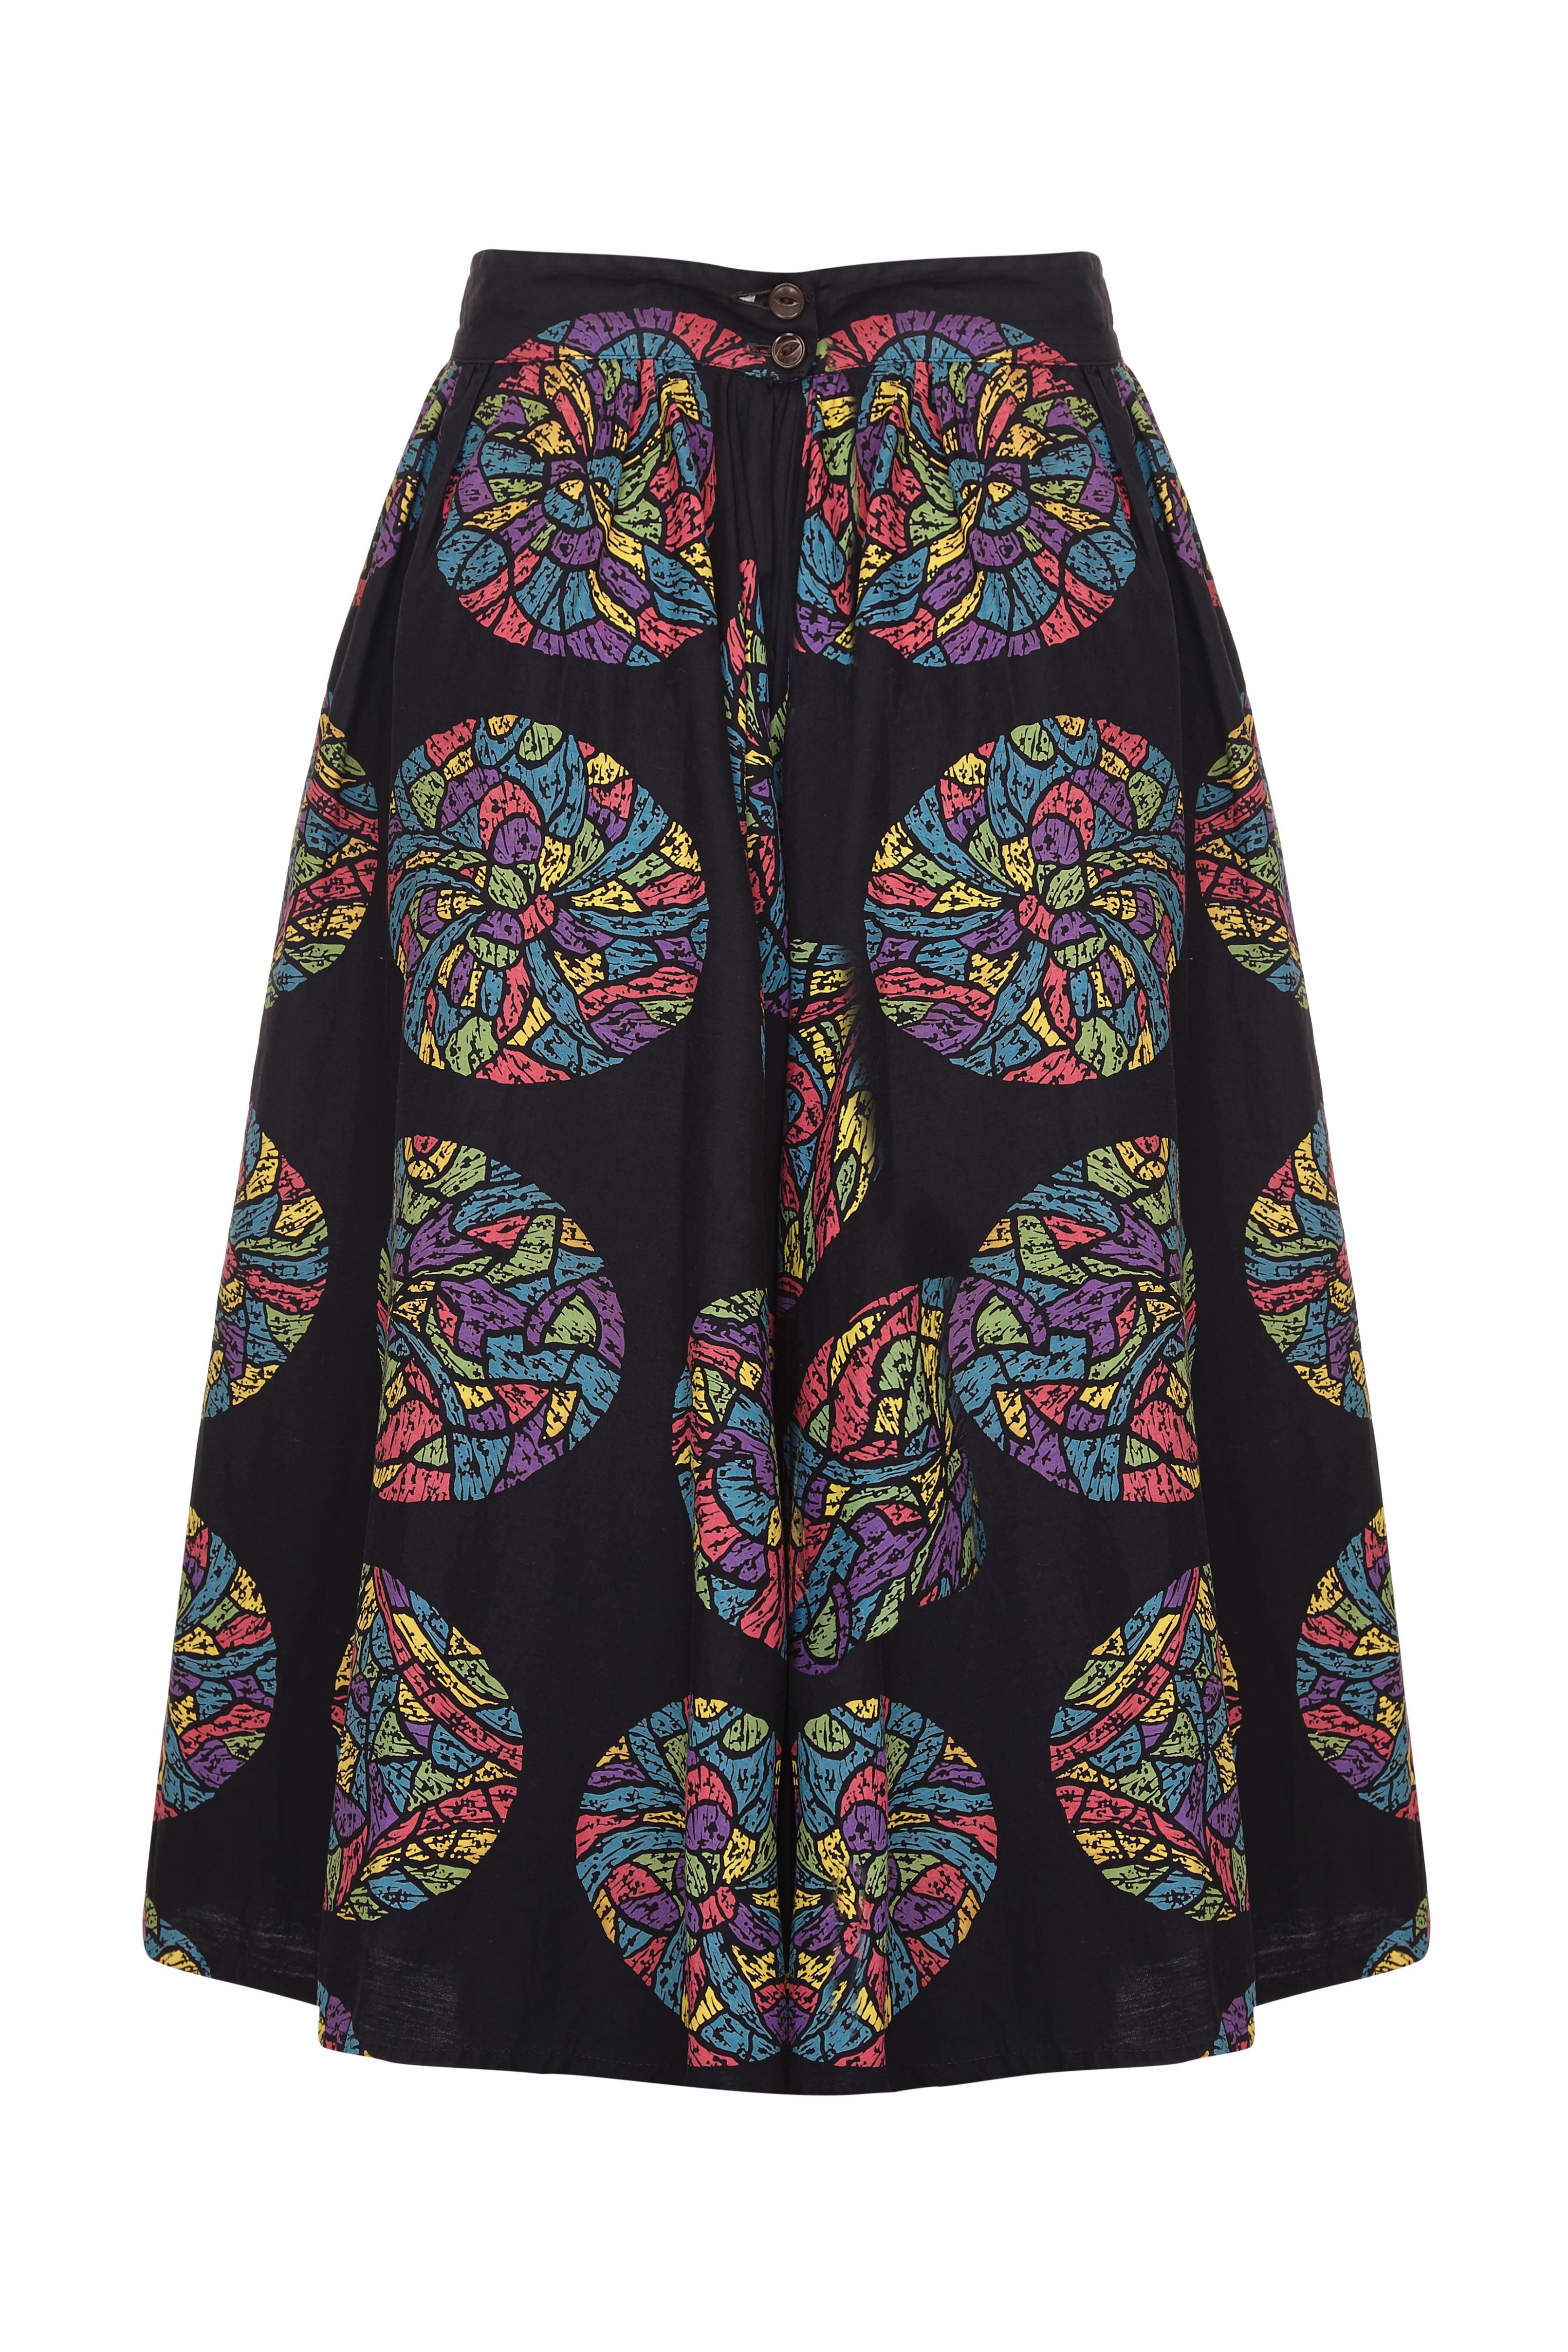 This charming original 1950s Mexican black cotton festival skirt with a vibrant circular multicoloured print in green, blue, fuchsia, and yellow tones is in superb vintage condition and is a wonderfully versatile piece. It features a deep forward